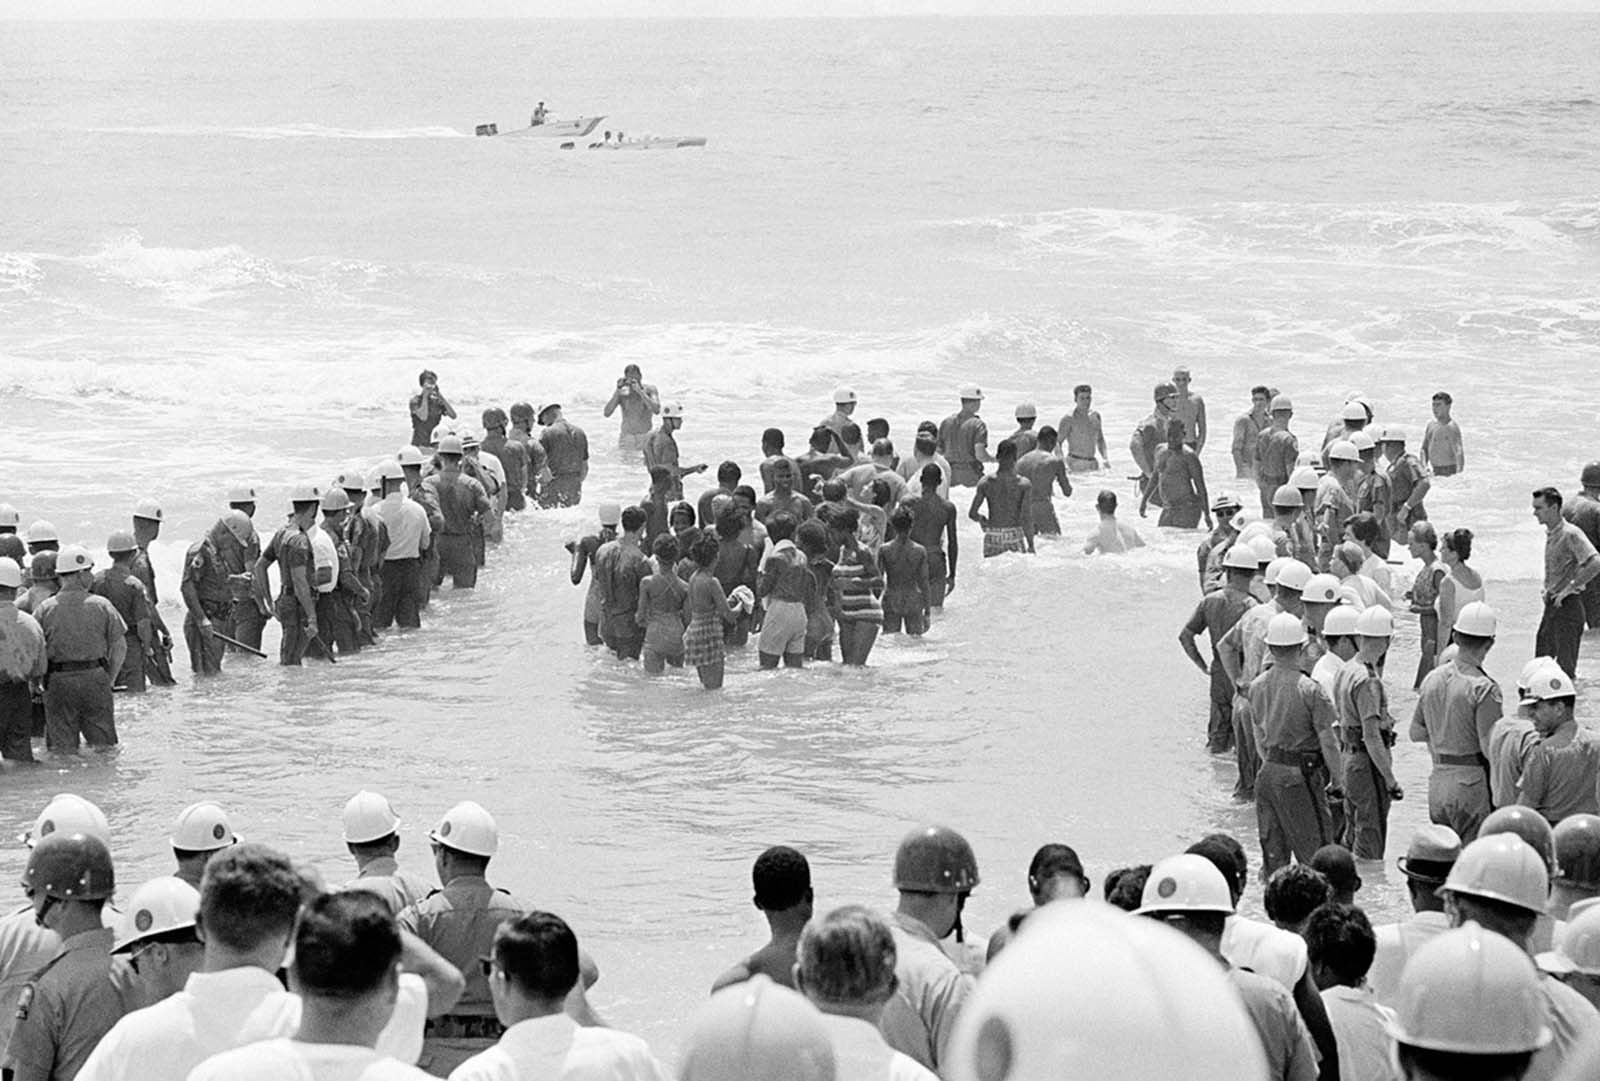 A group of African American and white demonstrators are guarded by a heavy surrounding force of police officers, during a wade-in at St. Augustine Beach, Florida, on June 29, 1964. Only a few segregationists were on hand and there were no incidents.